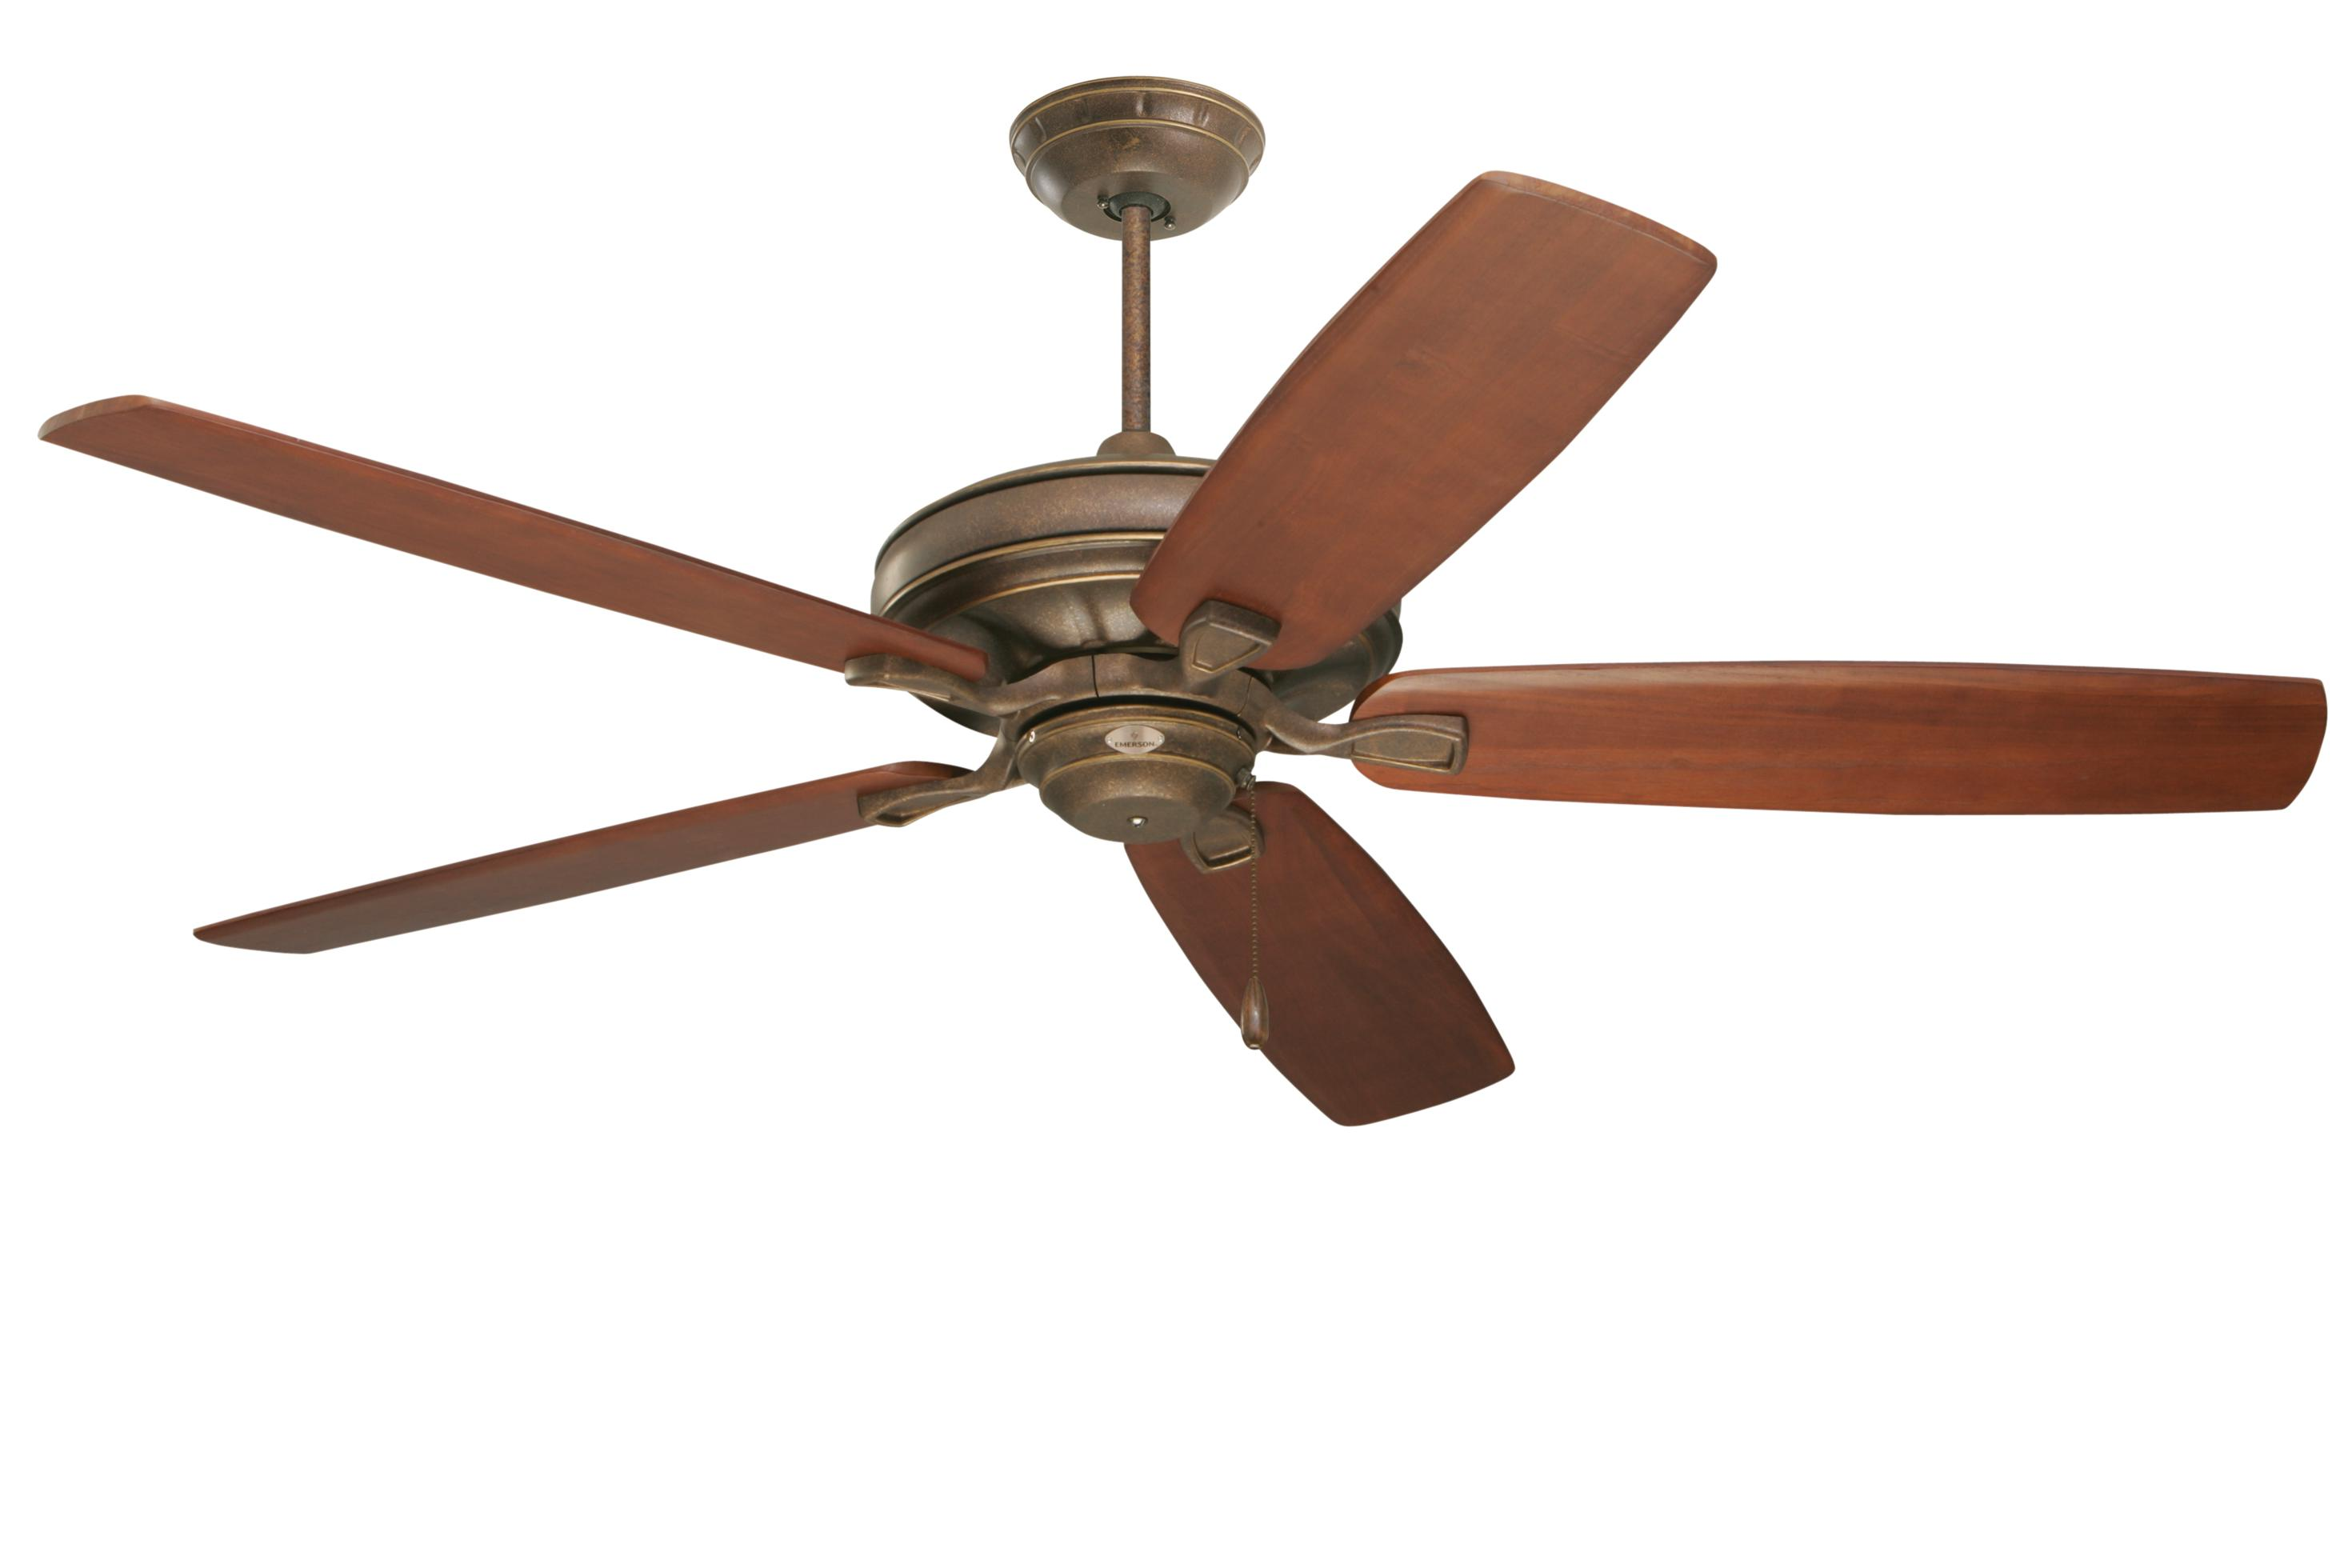 Ceiling Fan Wikipedia, What Ceiling Fan Gives Off The Most Light